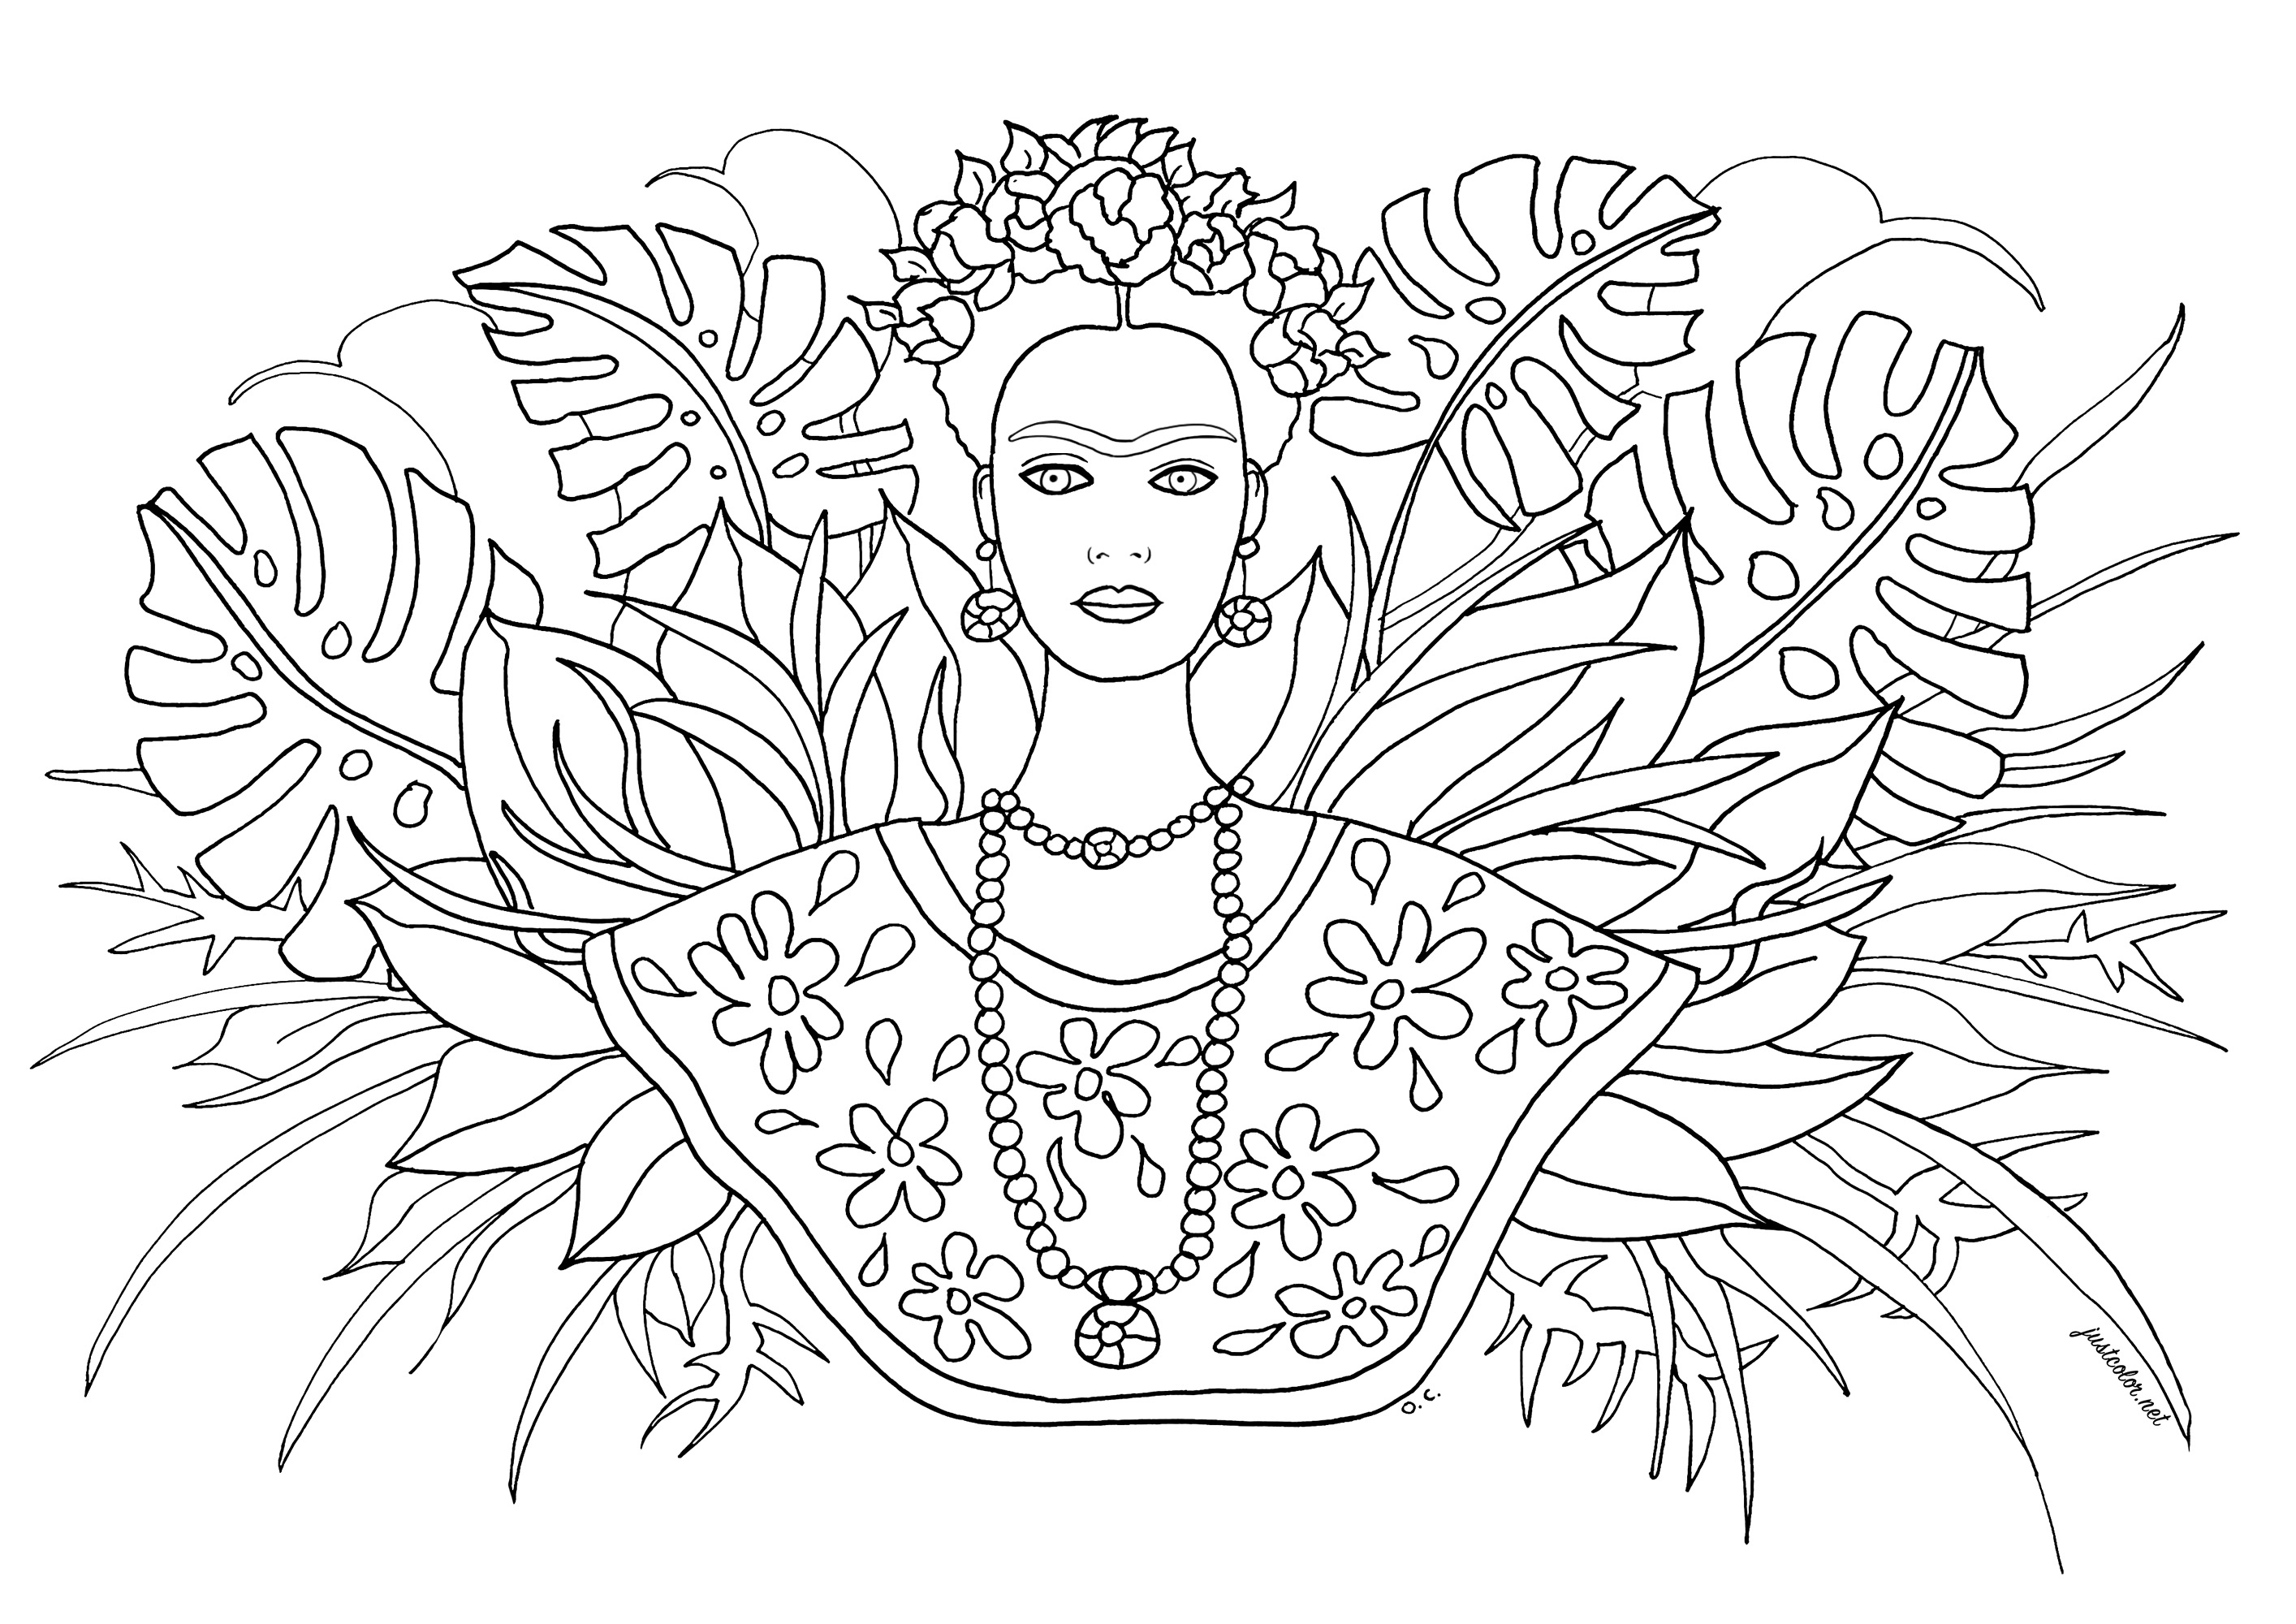 Frida Kahlo and leaves - Anti stress Adult Coloring Pages